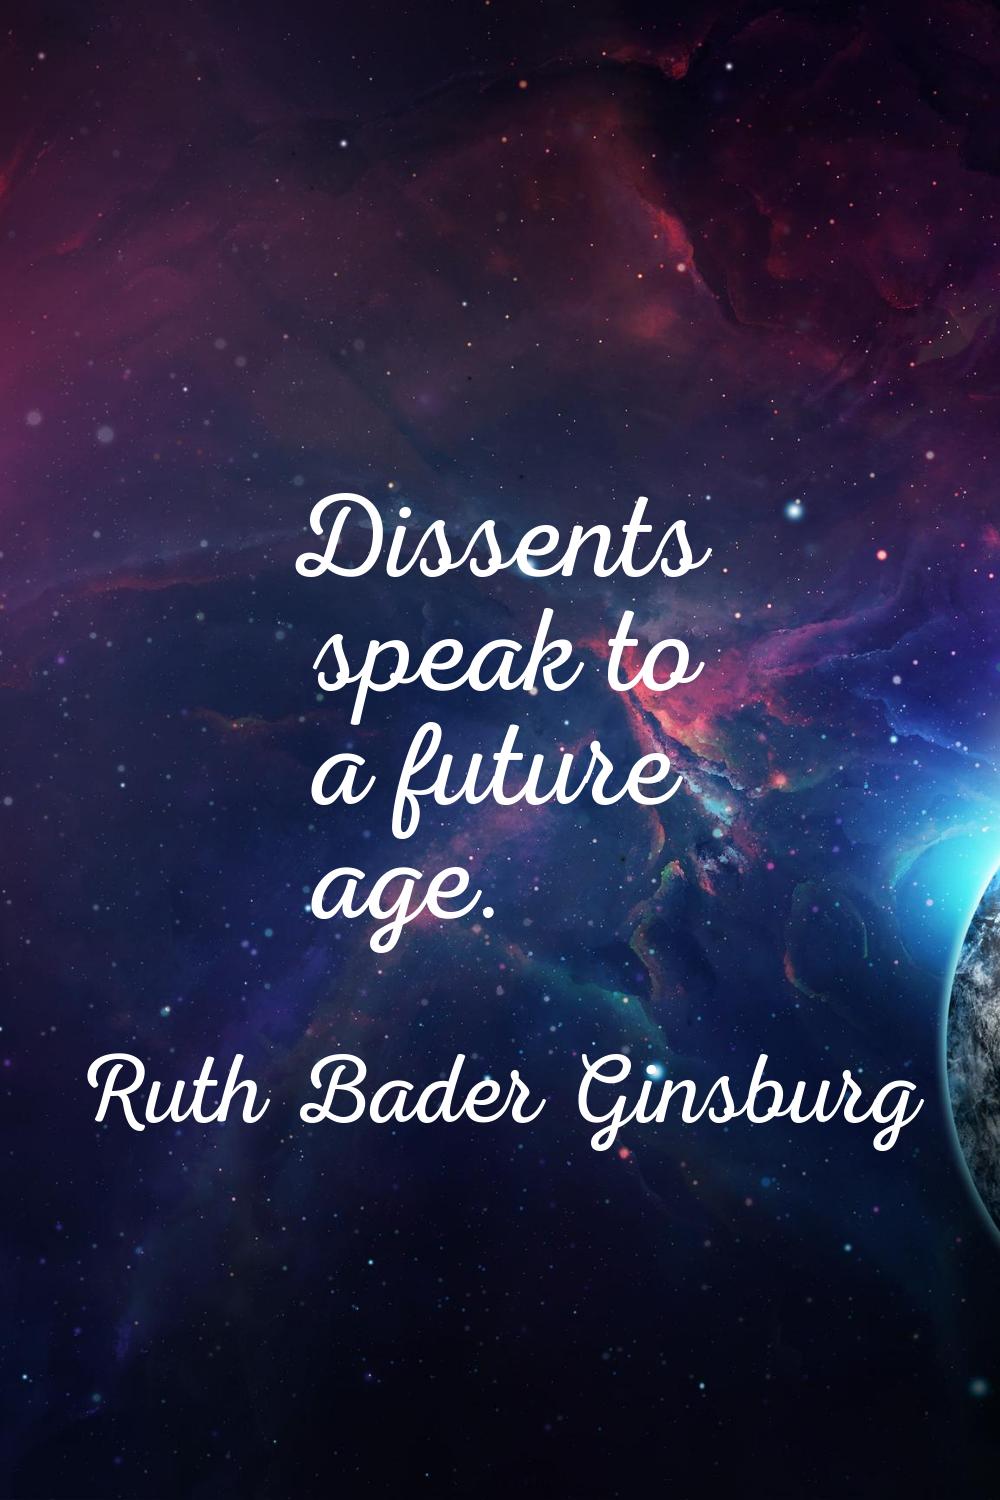 Dissents speak to a future age.